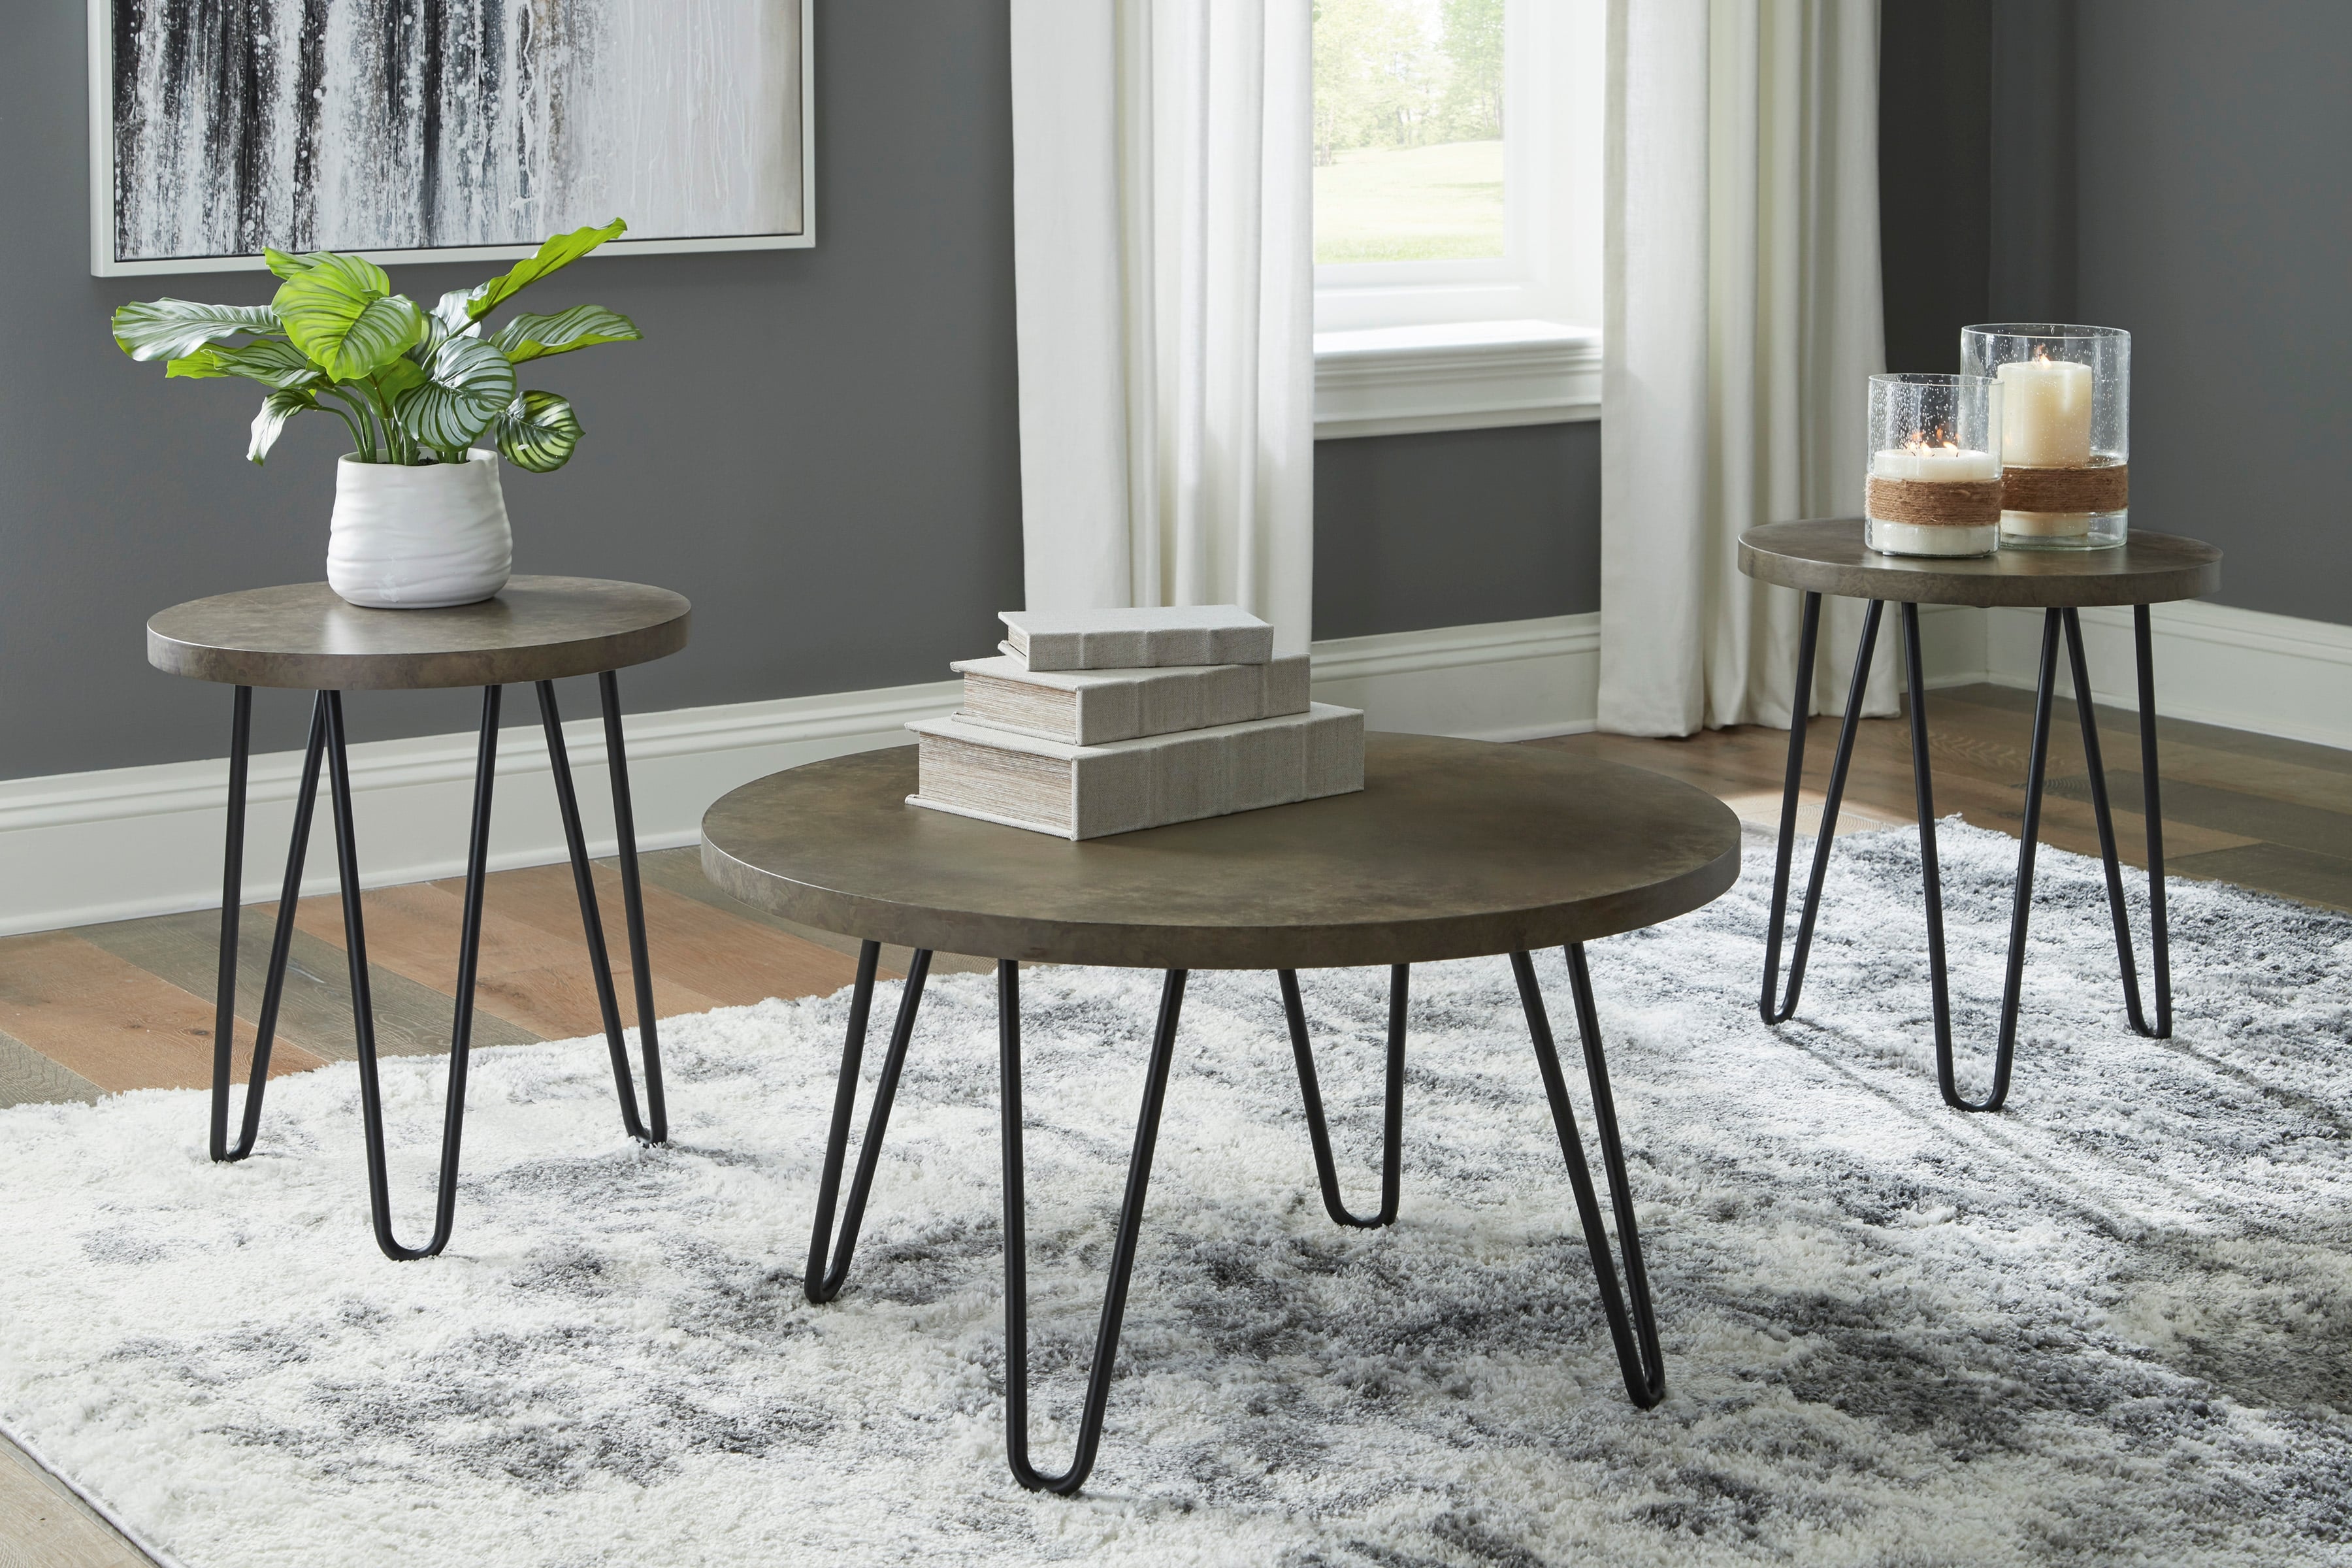 Signature Design by Ashley Hadasky T144-13 3-Piece Occasional Table Set  with Hairpin Legs Furniture Fair North Carolina Occ Group